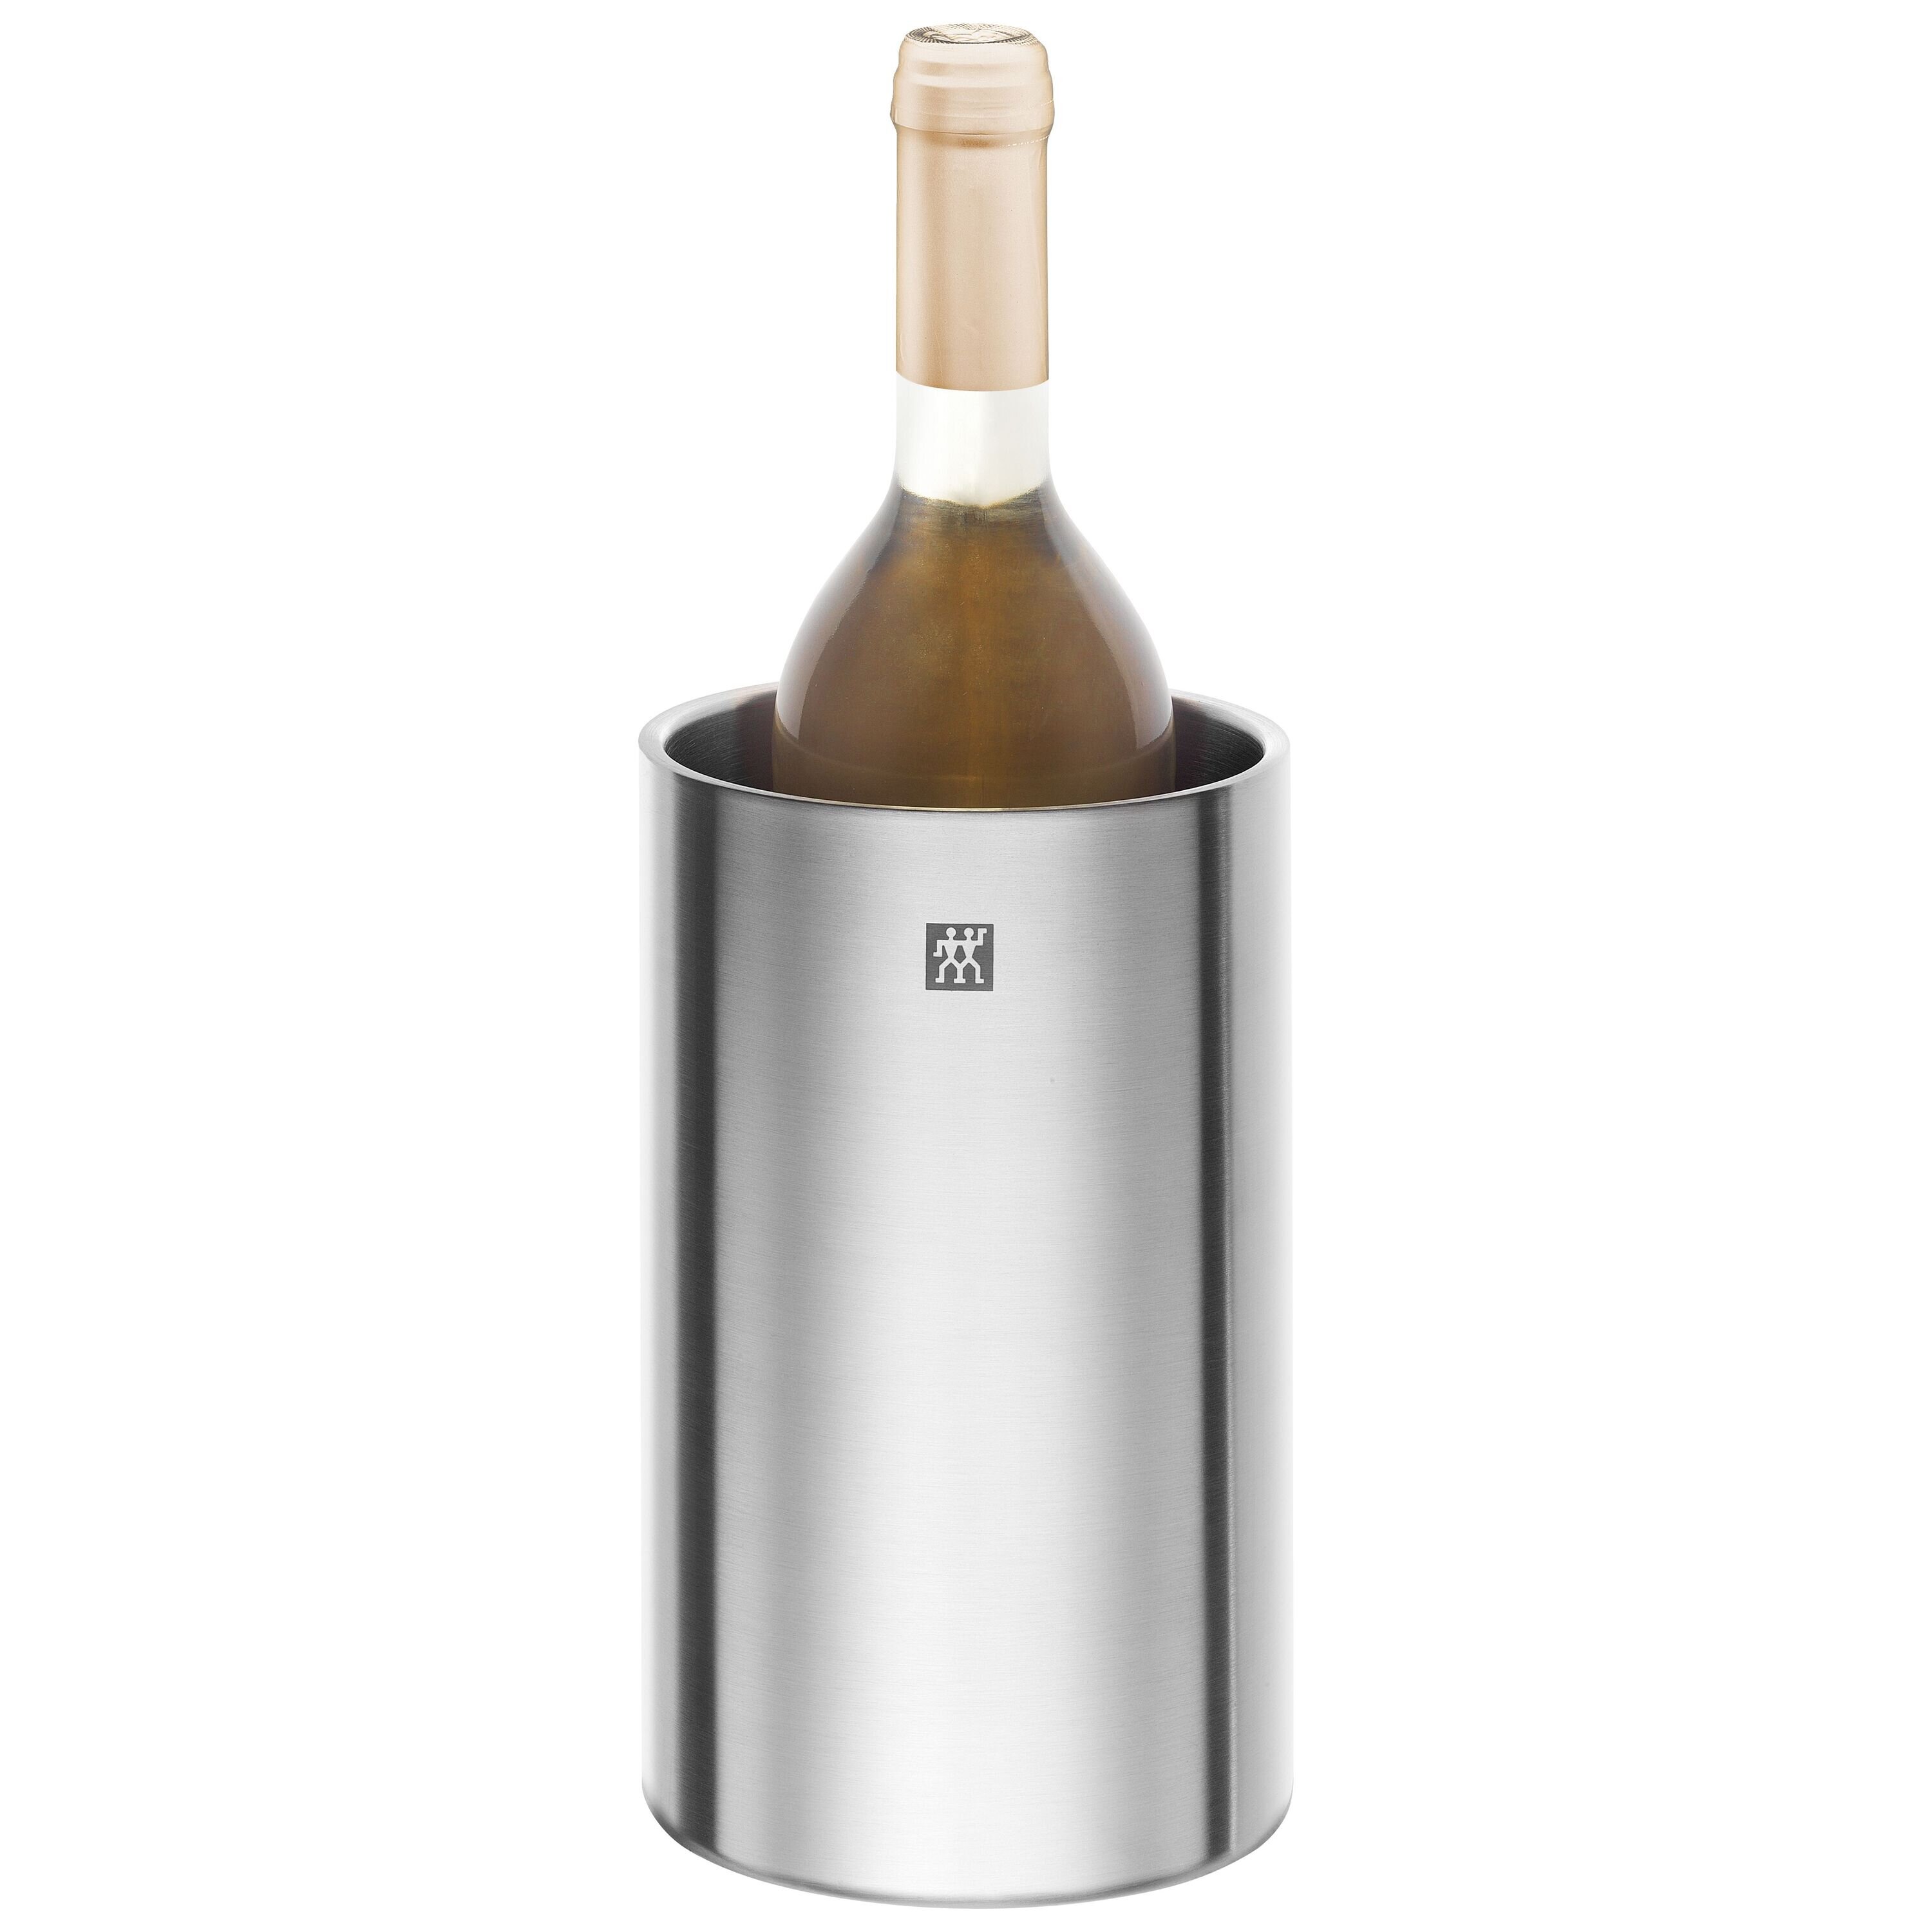 Wine Bottle Chiller Cooler Set: Double Wall Stainless Steel Wine Cooler and  Coaster Keep Wine at Perfect Temperature